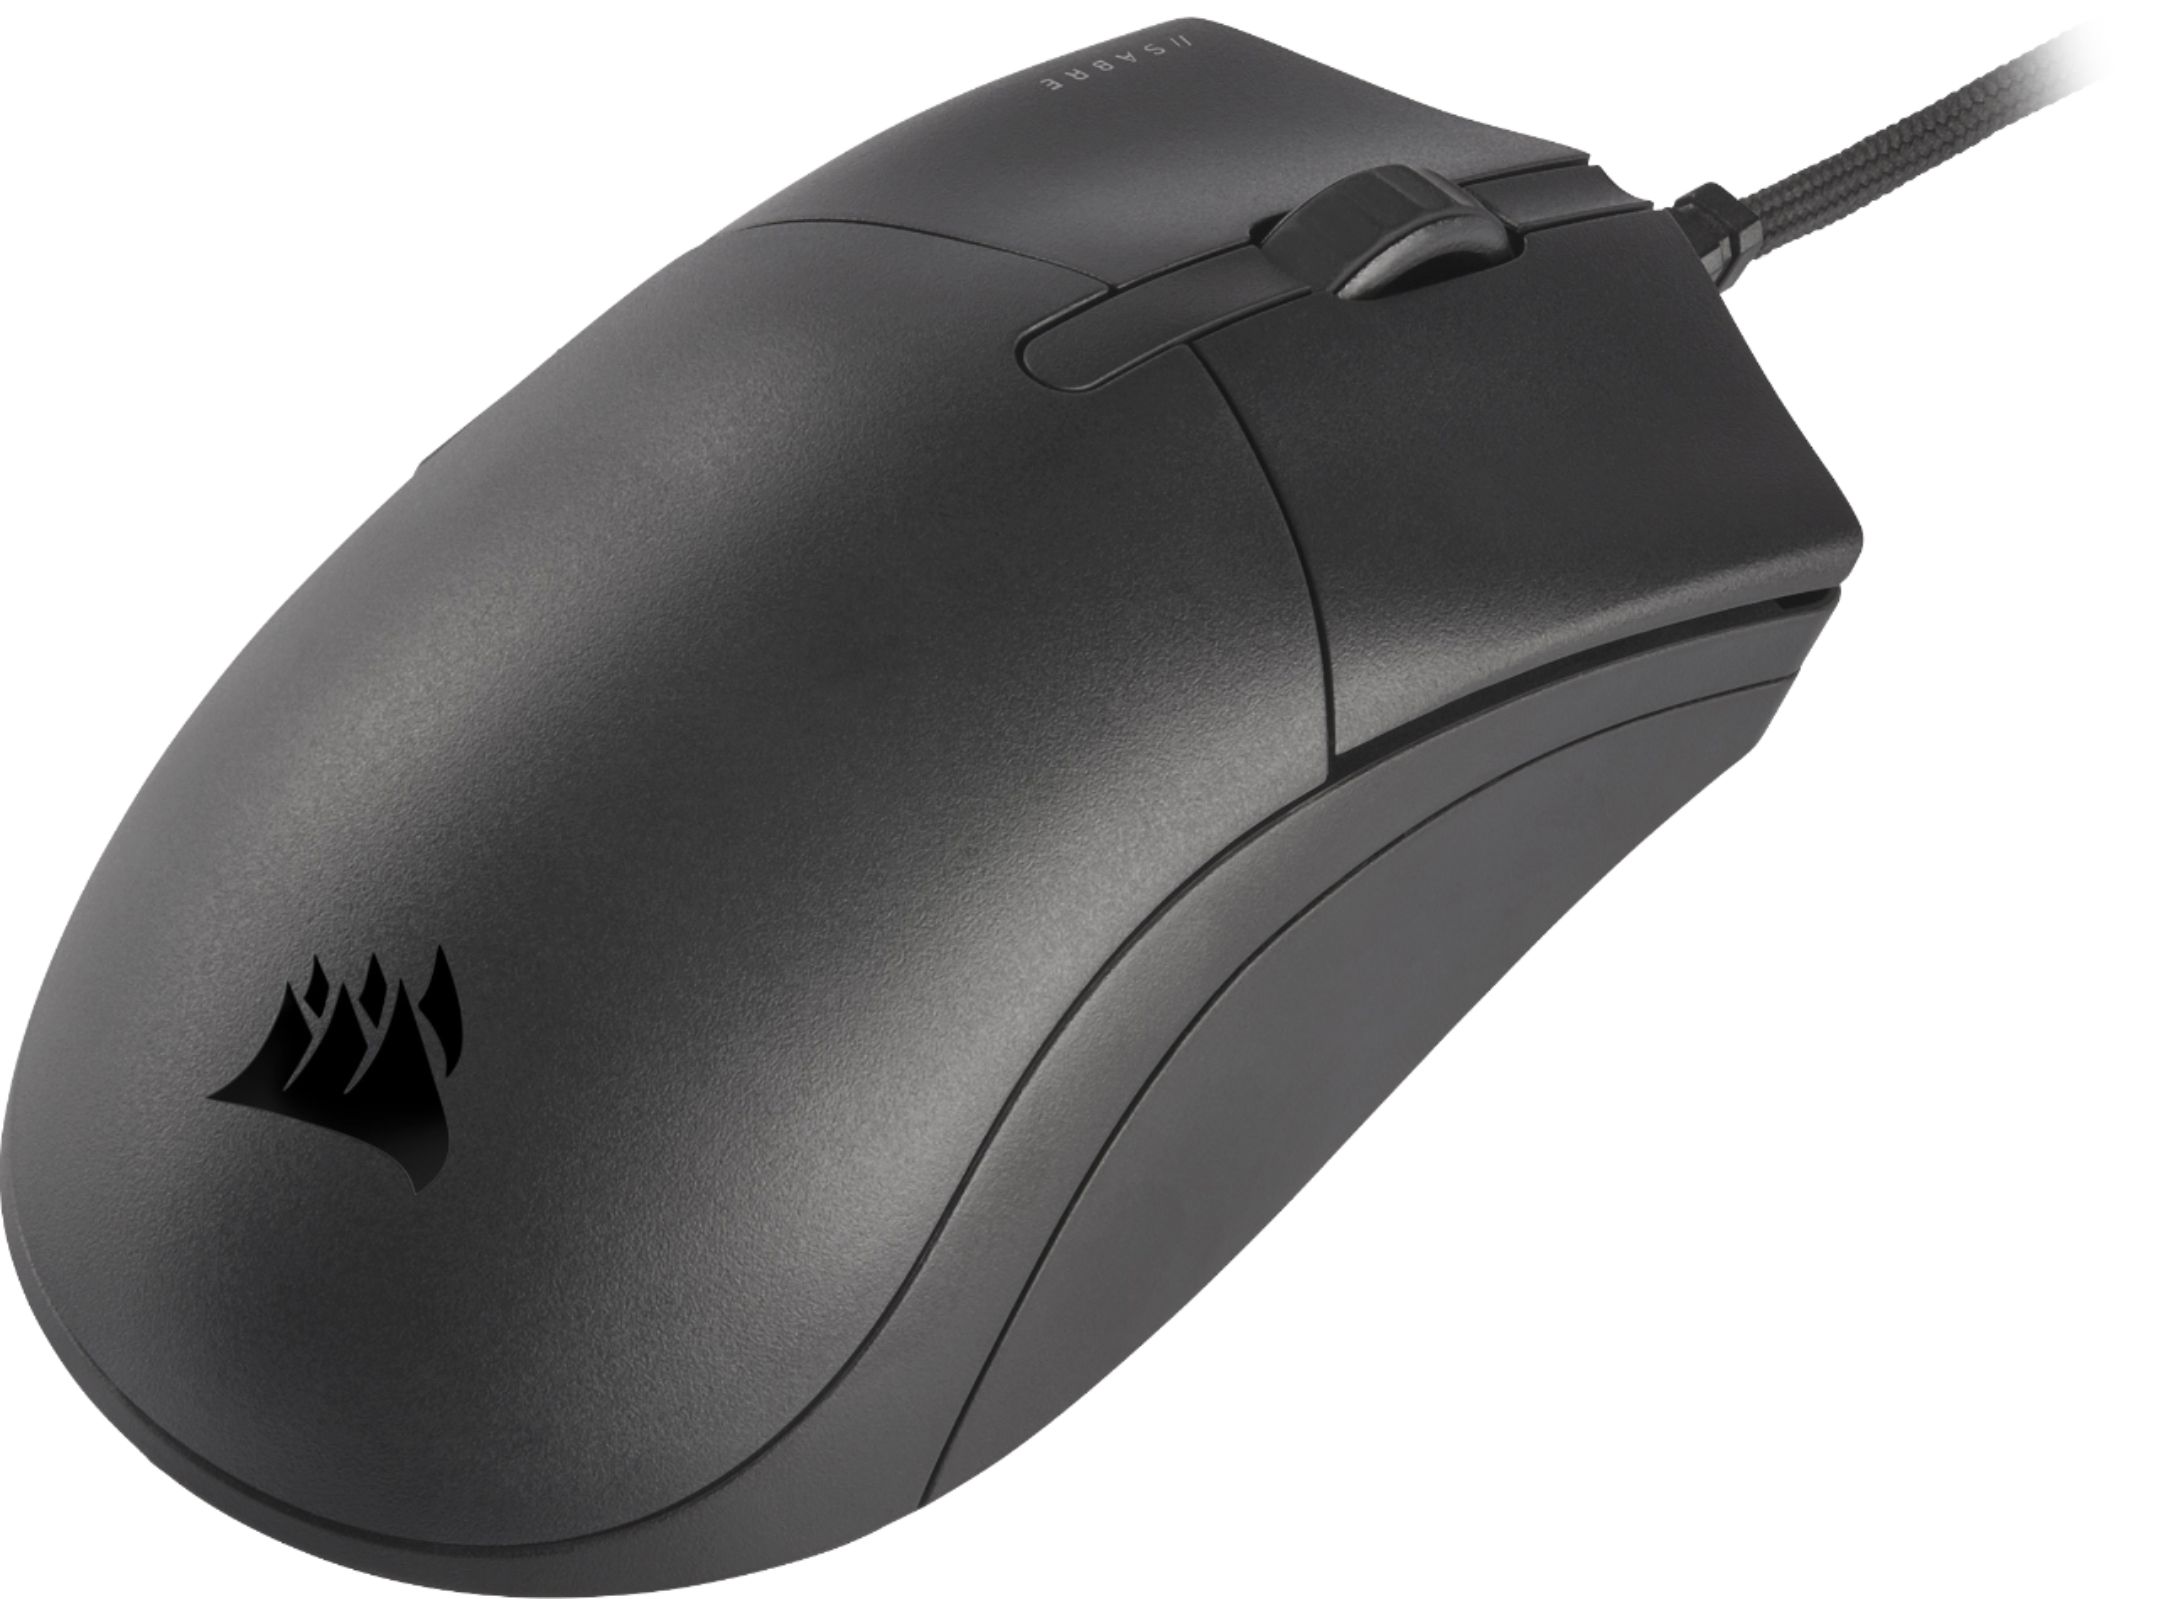 Back View: CORSAIR - CHAMPION SERIES SABRE PRO  Lightweight Wired Optical Gaming Mouse with 69g Ultra-lightweight design - Black